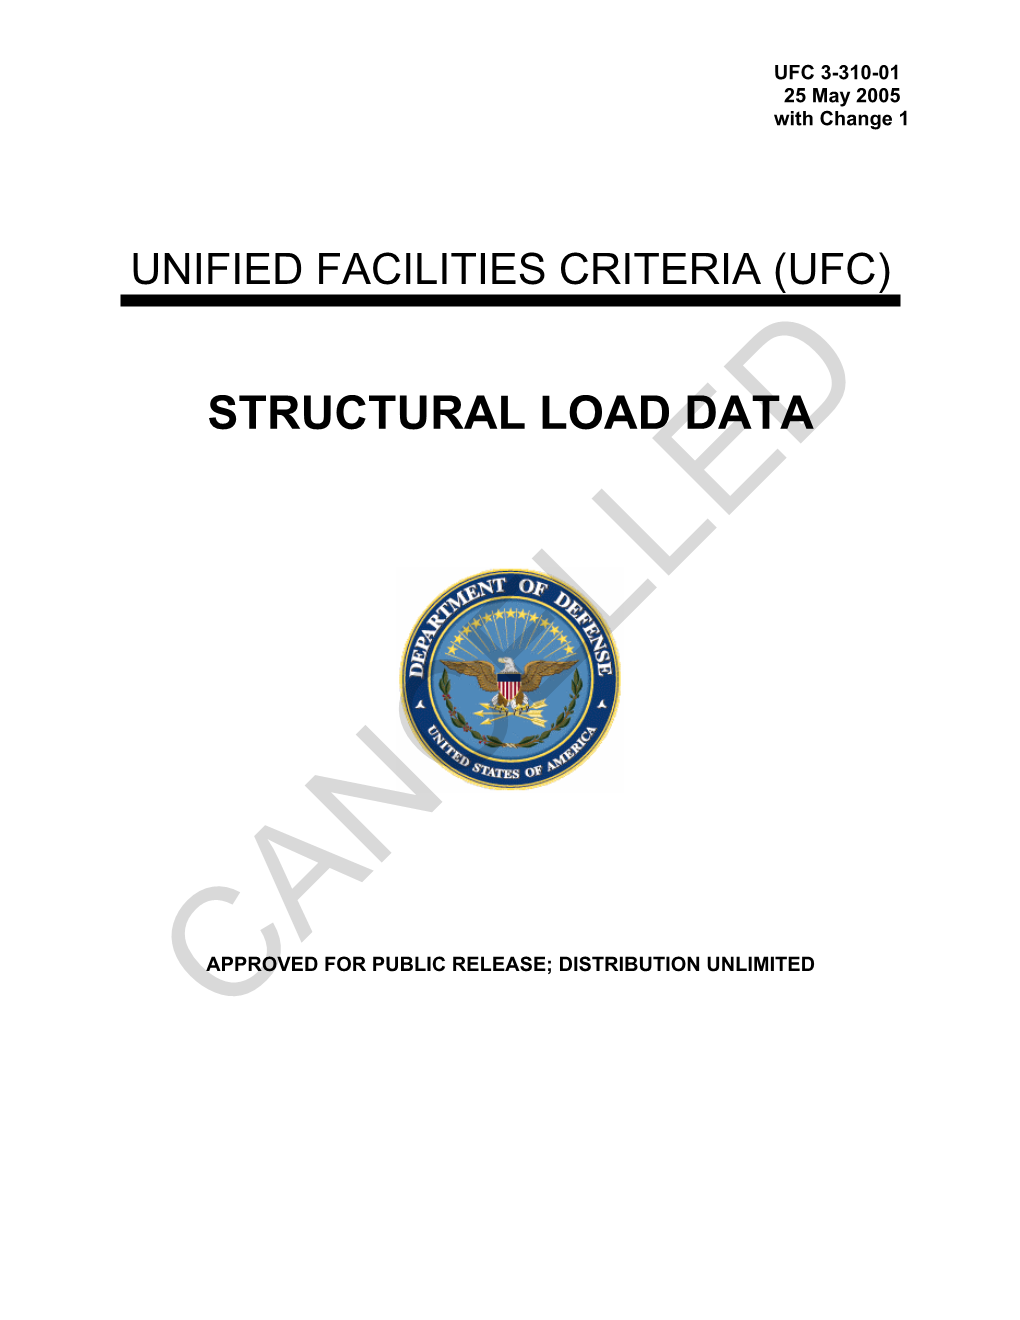 UFC 3-310-01 Structural Load Data, with Change 1 (05-25-2005)